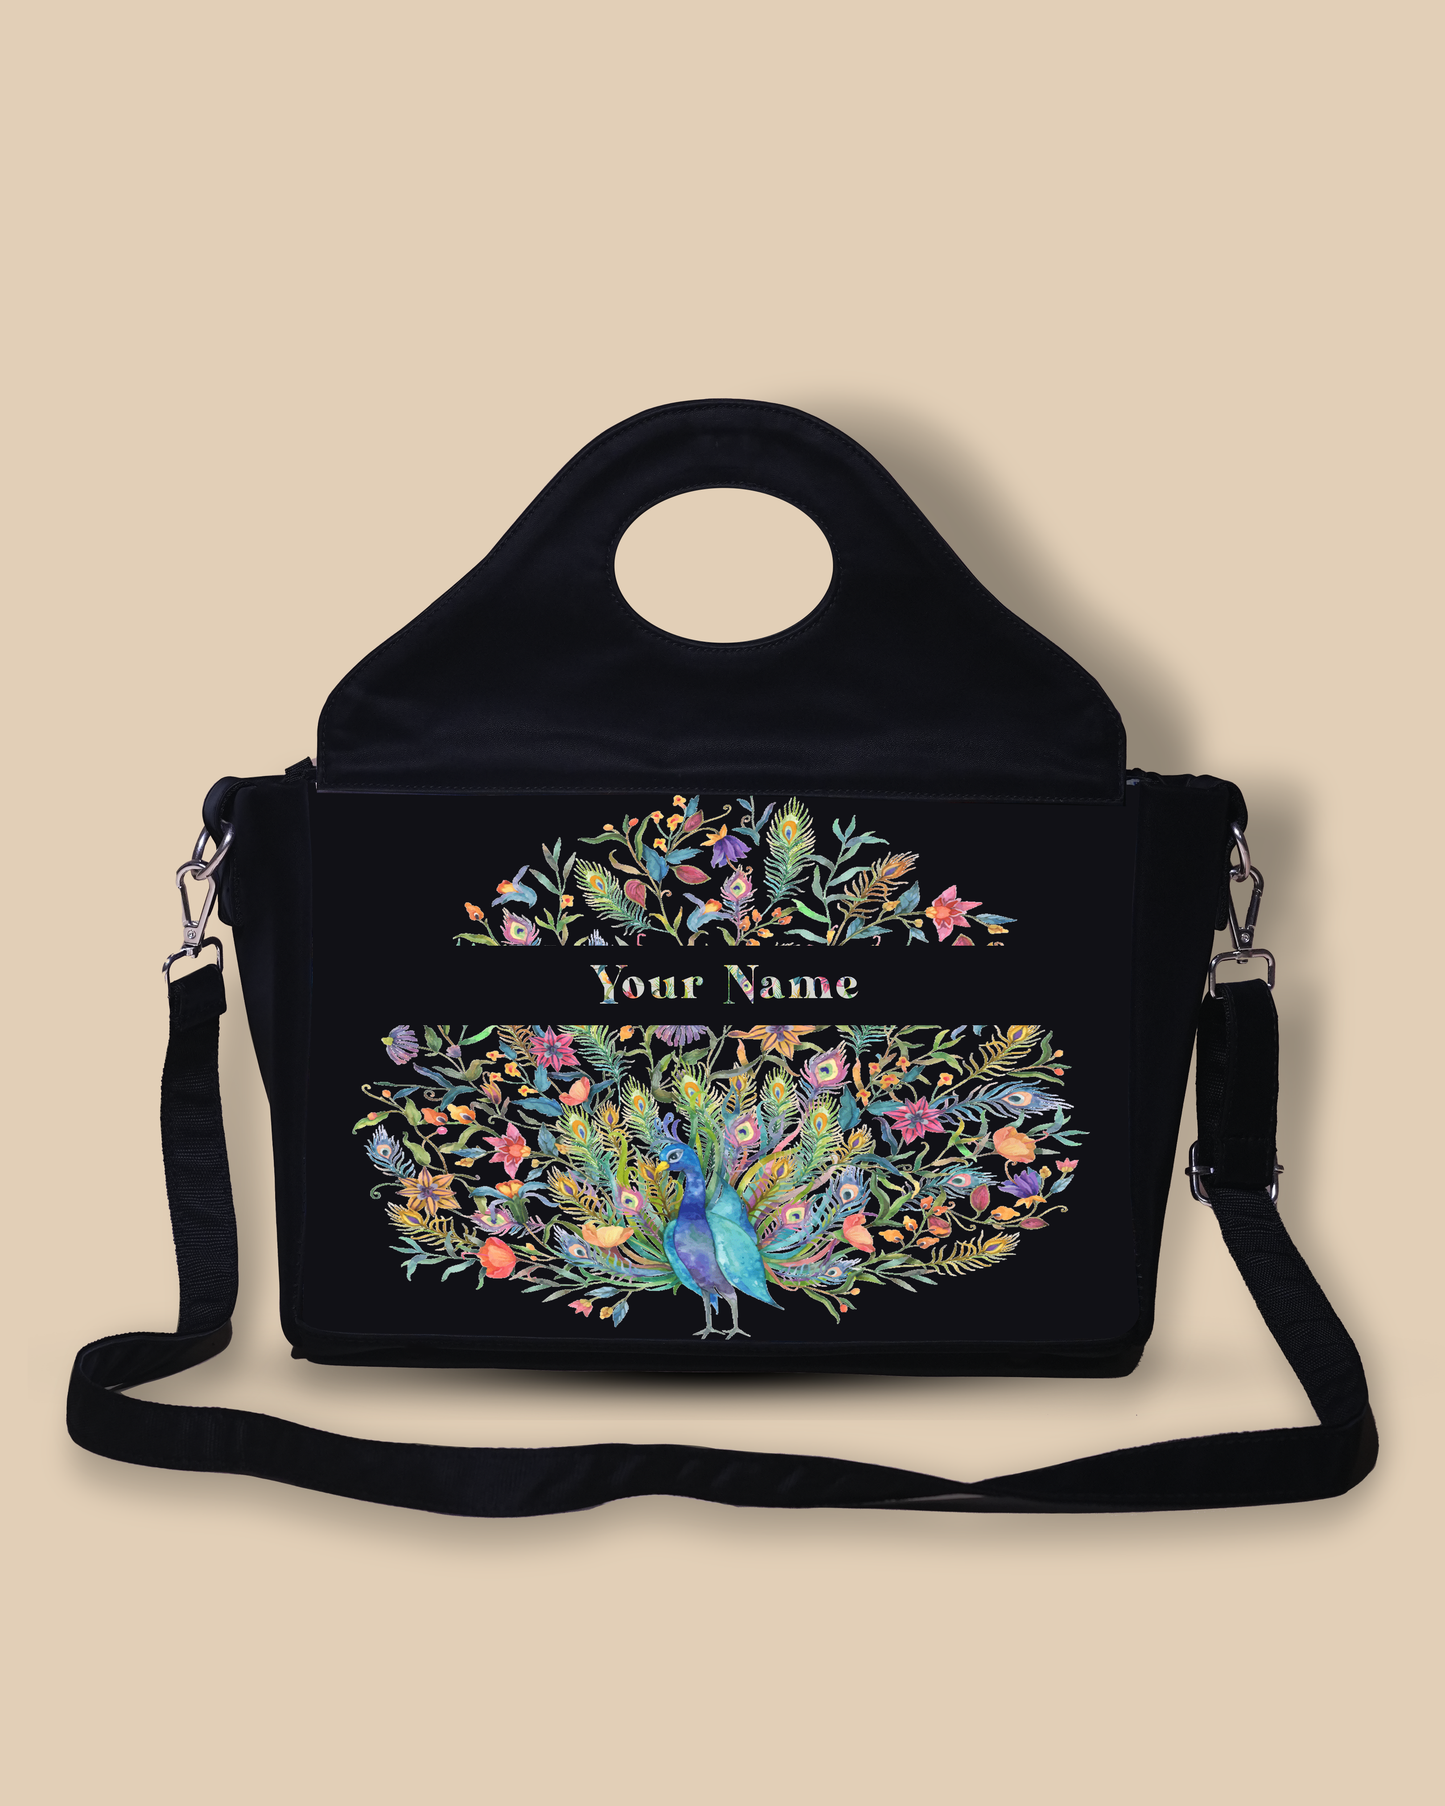 Up Embossed Peacock Design on Leather Personalized Sling Purse